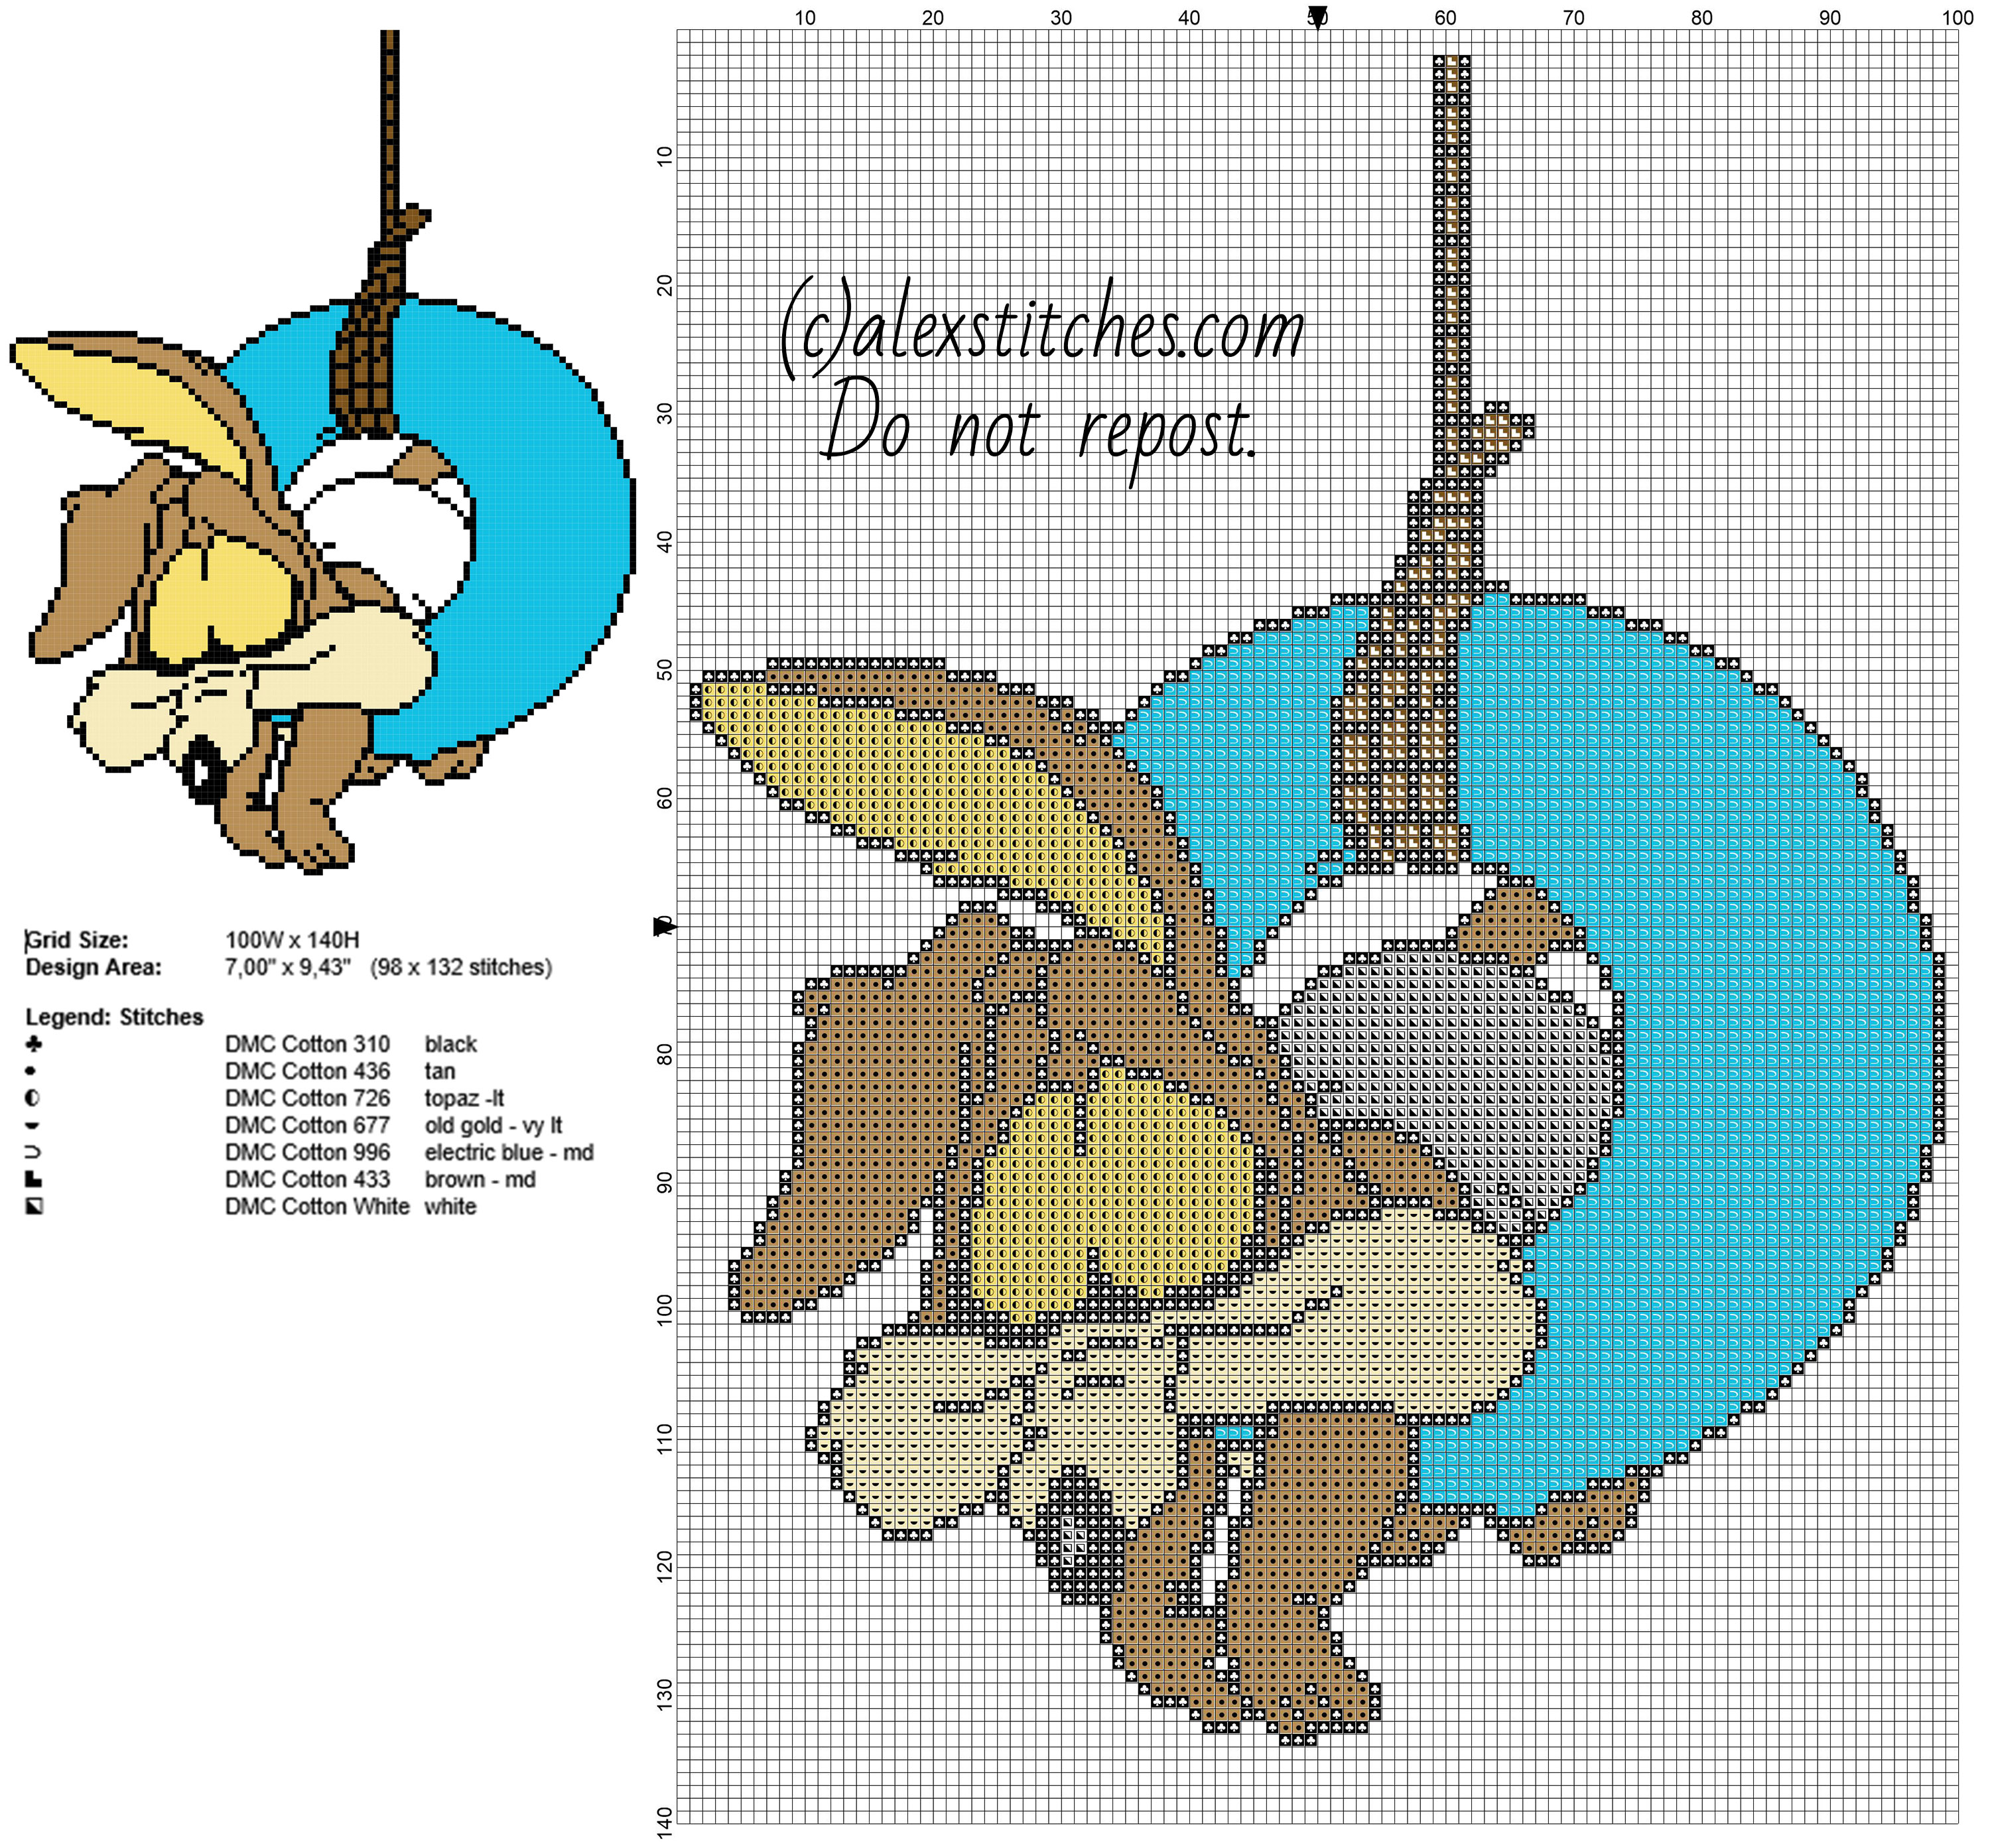 Baby Wile E Coyote Looney Tunes cartoons character cross stitch pattern 98 x 132